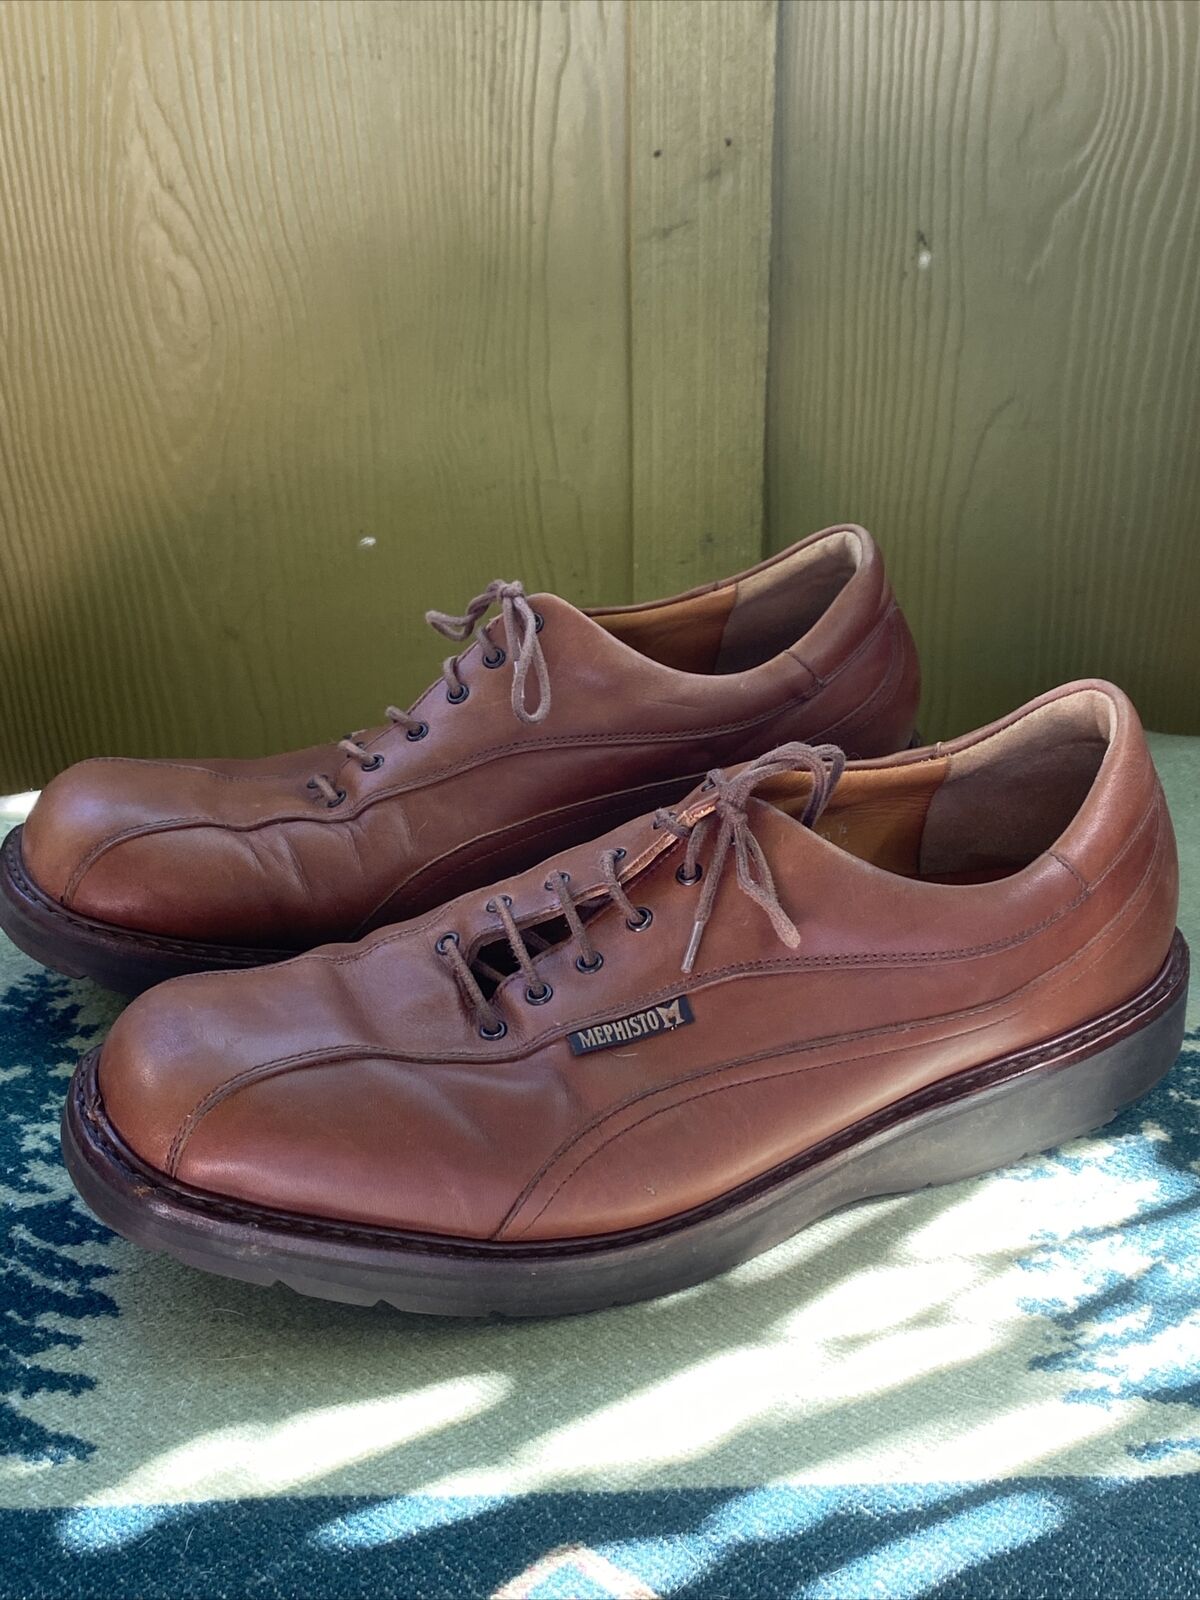 Menapos;s Large special price Mephisto Abel 12 Ranking TOP20 M Lace Chestnut Up Calfskin Walking